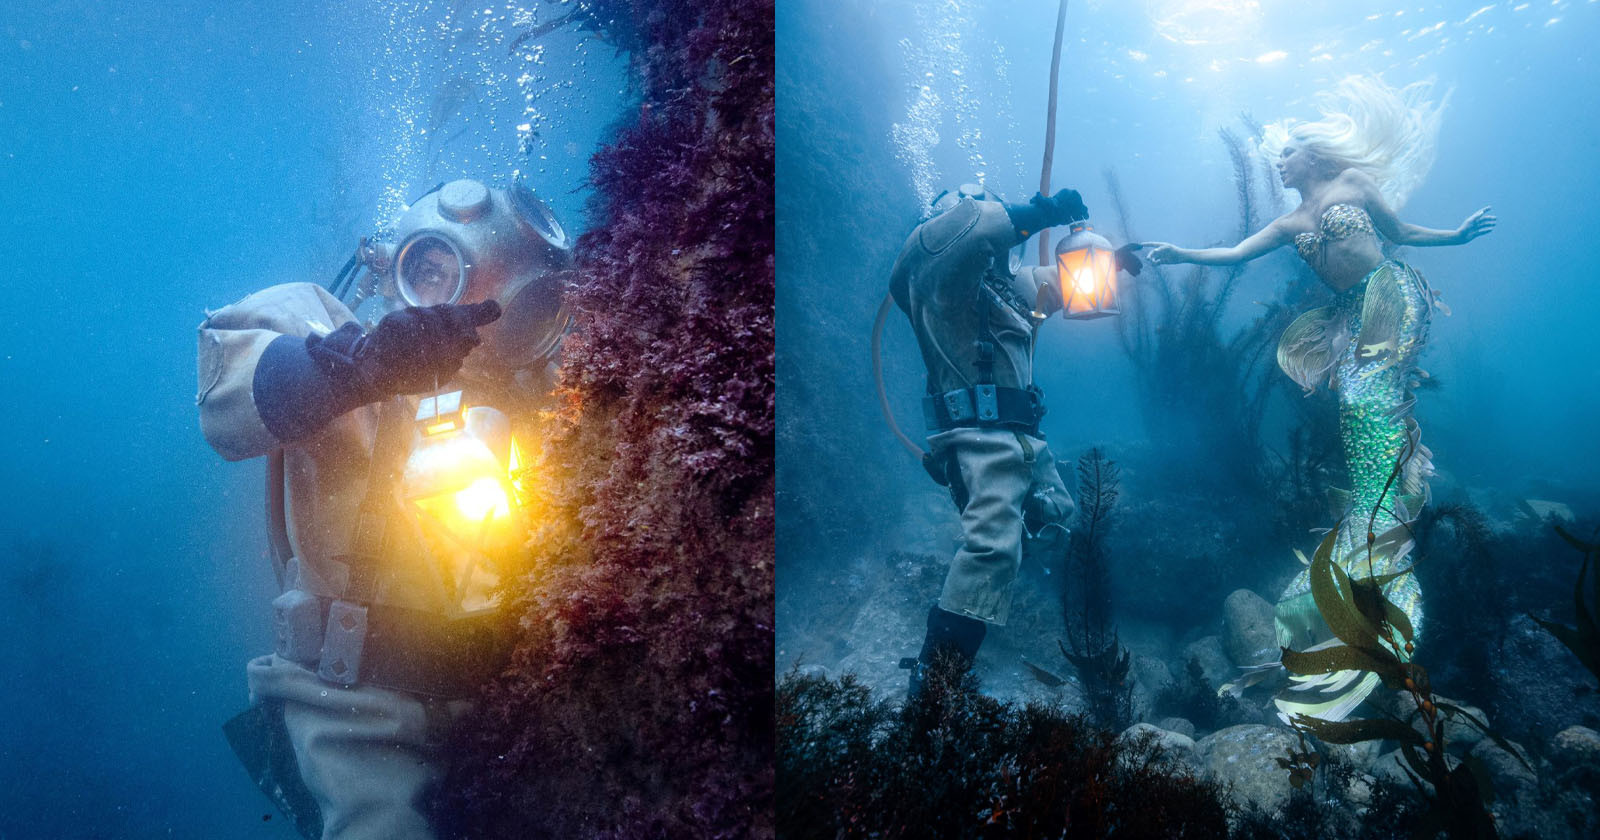 The Diver and the Mermaid: Photo Series Shot 20 Feet Under the Sea